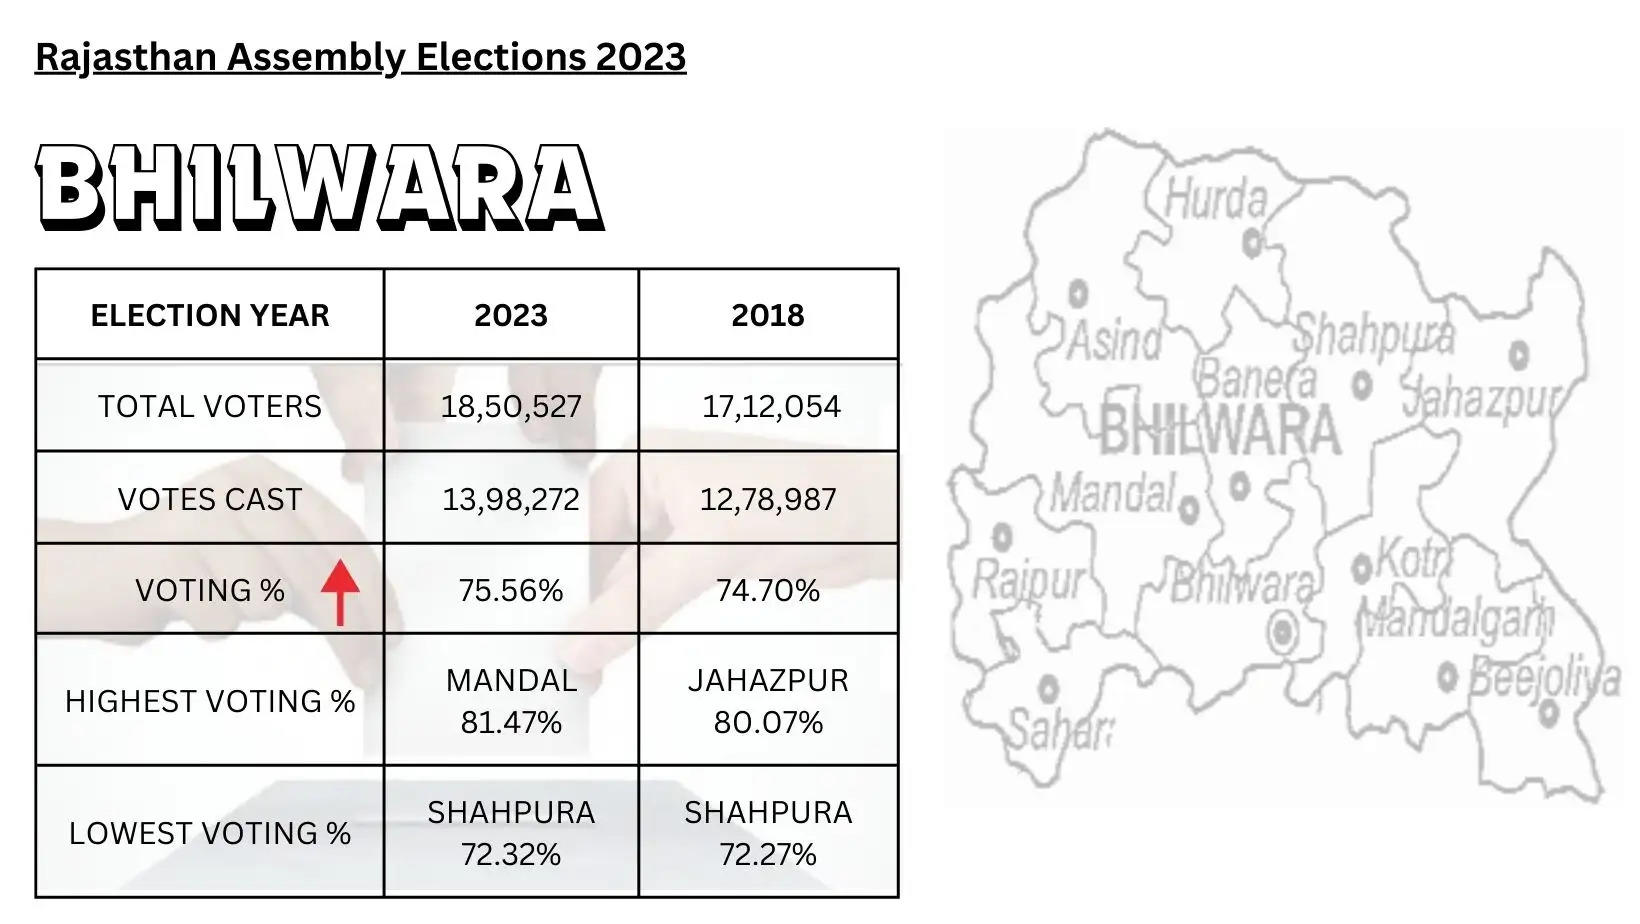 Rajasthan Election Results - Voting Updates from Bhilwara Elections News 2023